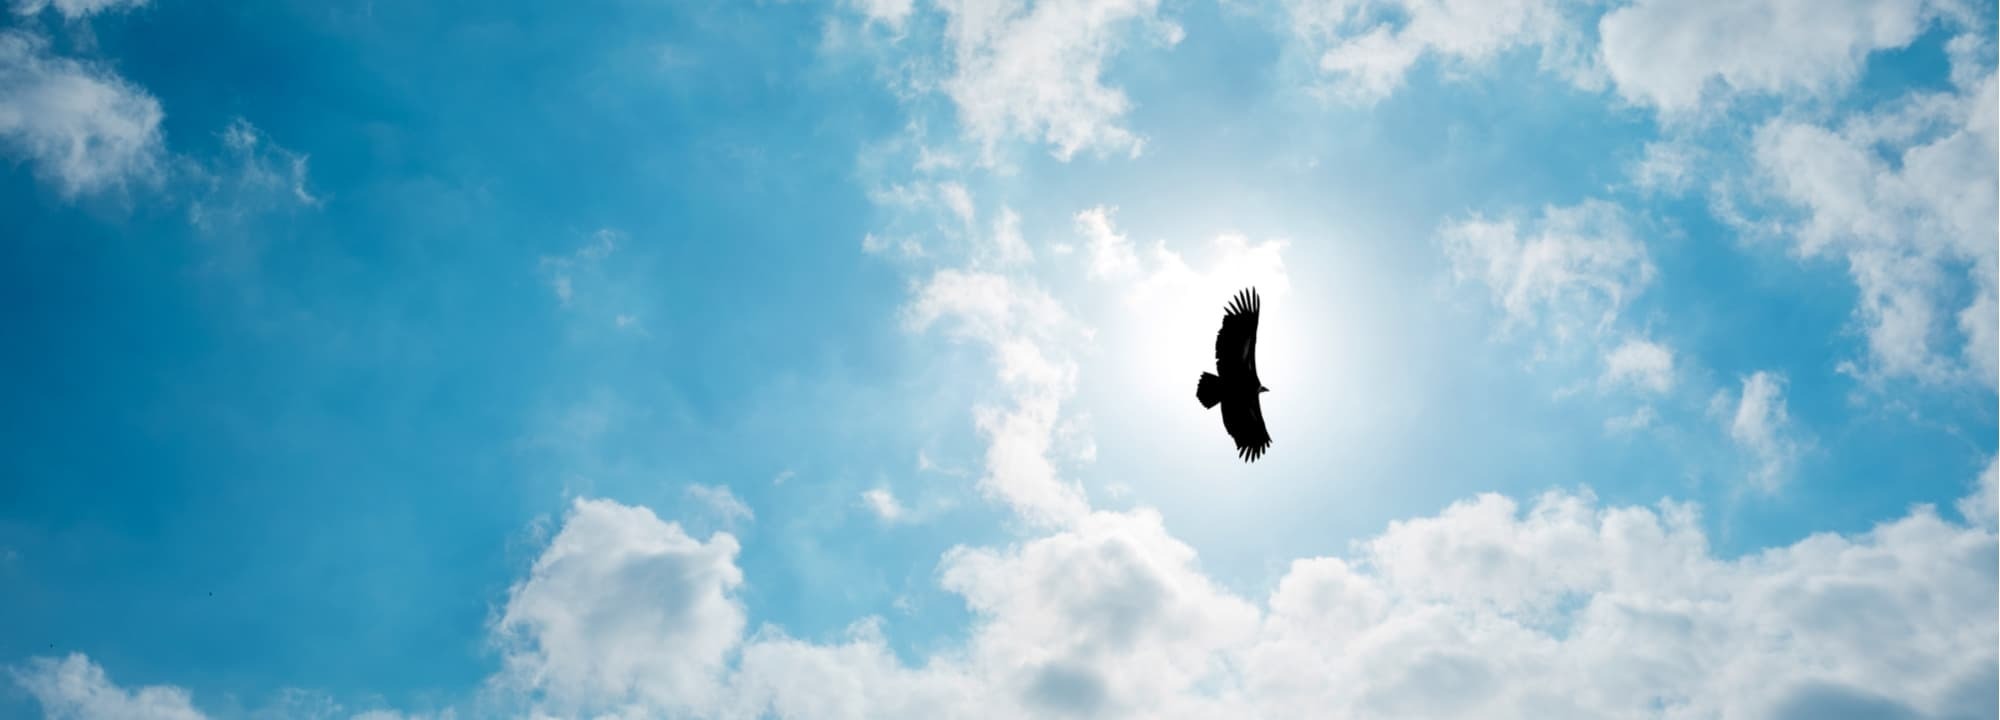 Eagle soaring in the clouds